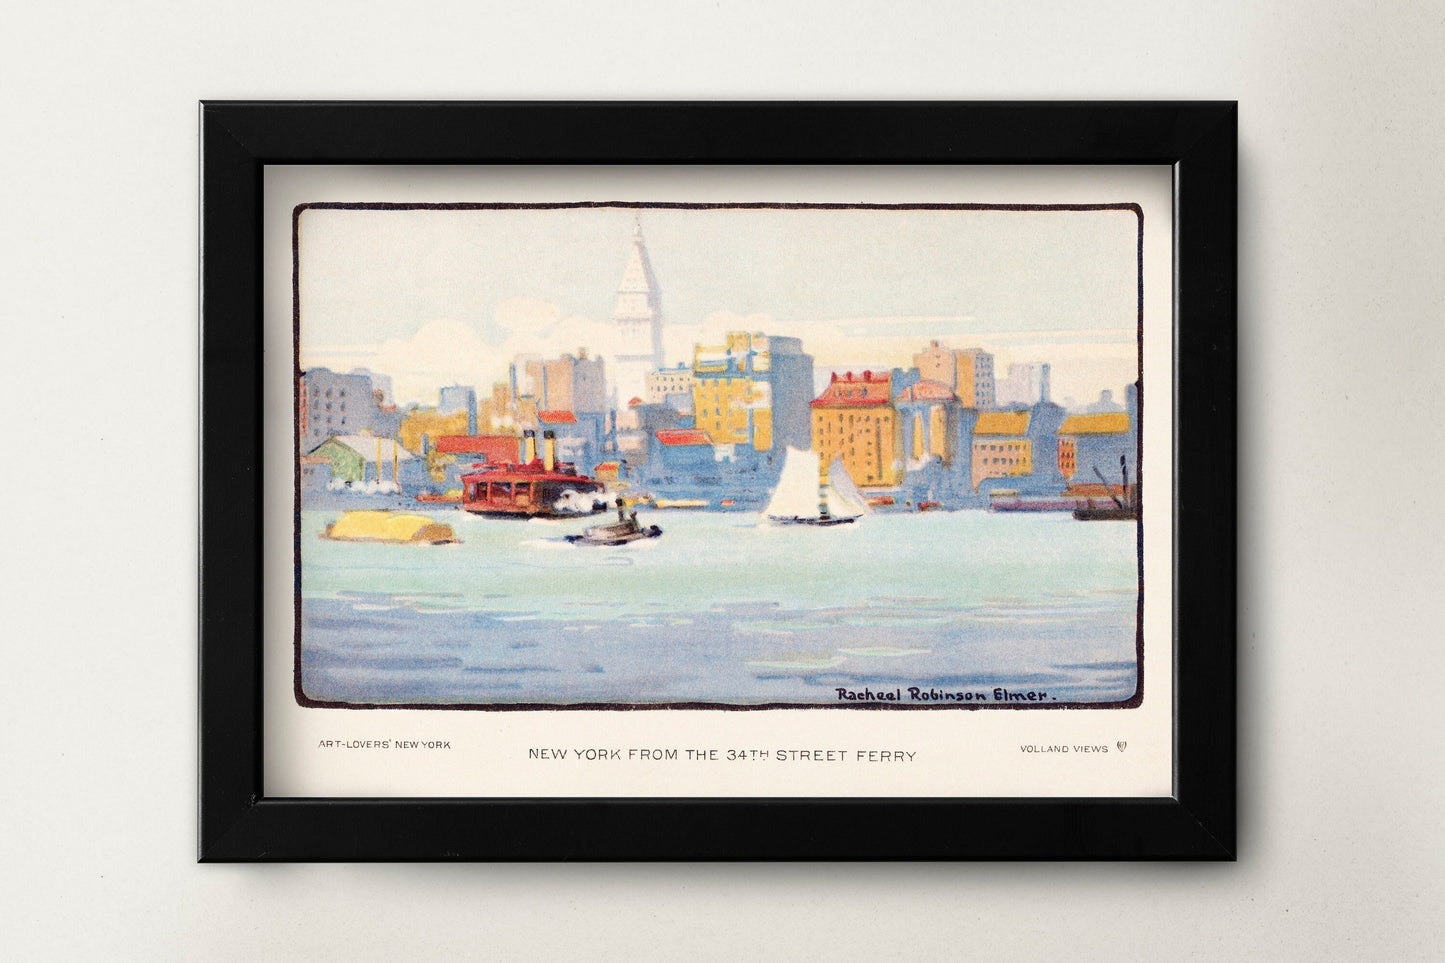 New York from the 34th Street Ferry (1914) by Rachael Robinson Elmer | New York Wall Art | Landscape Wall Art | New York Painting Prints